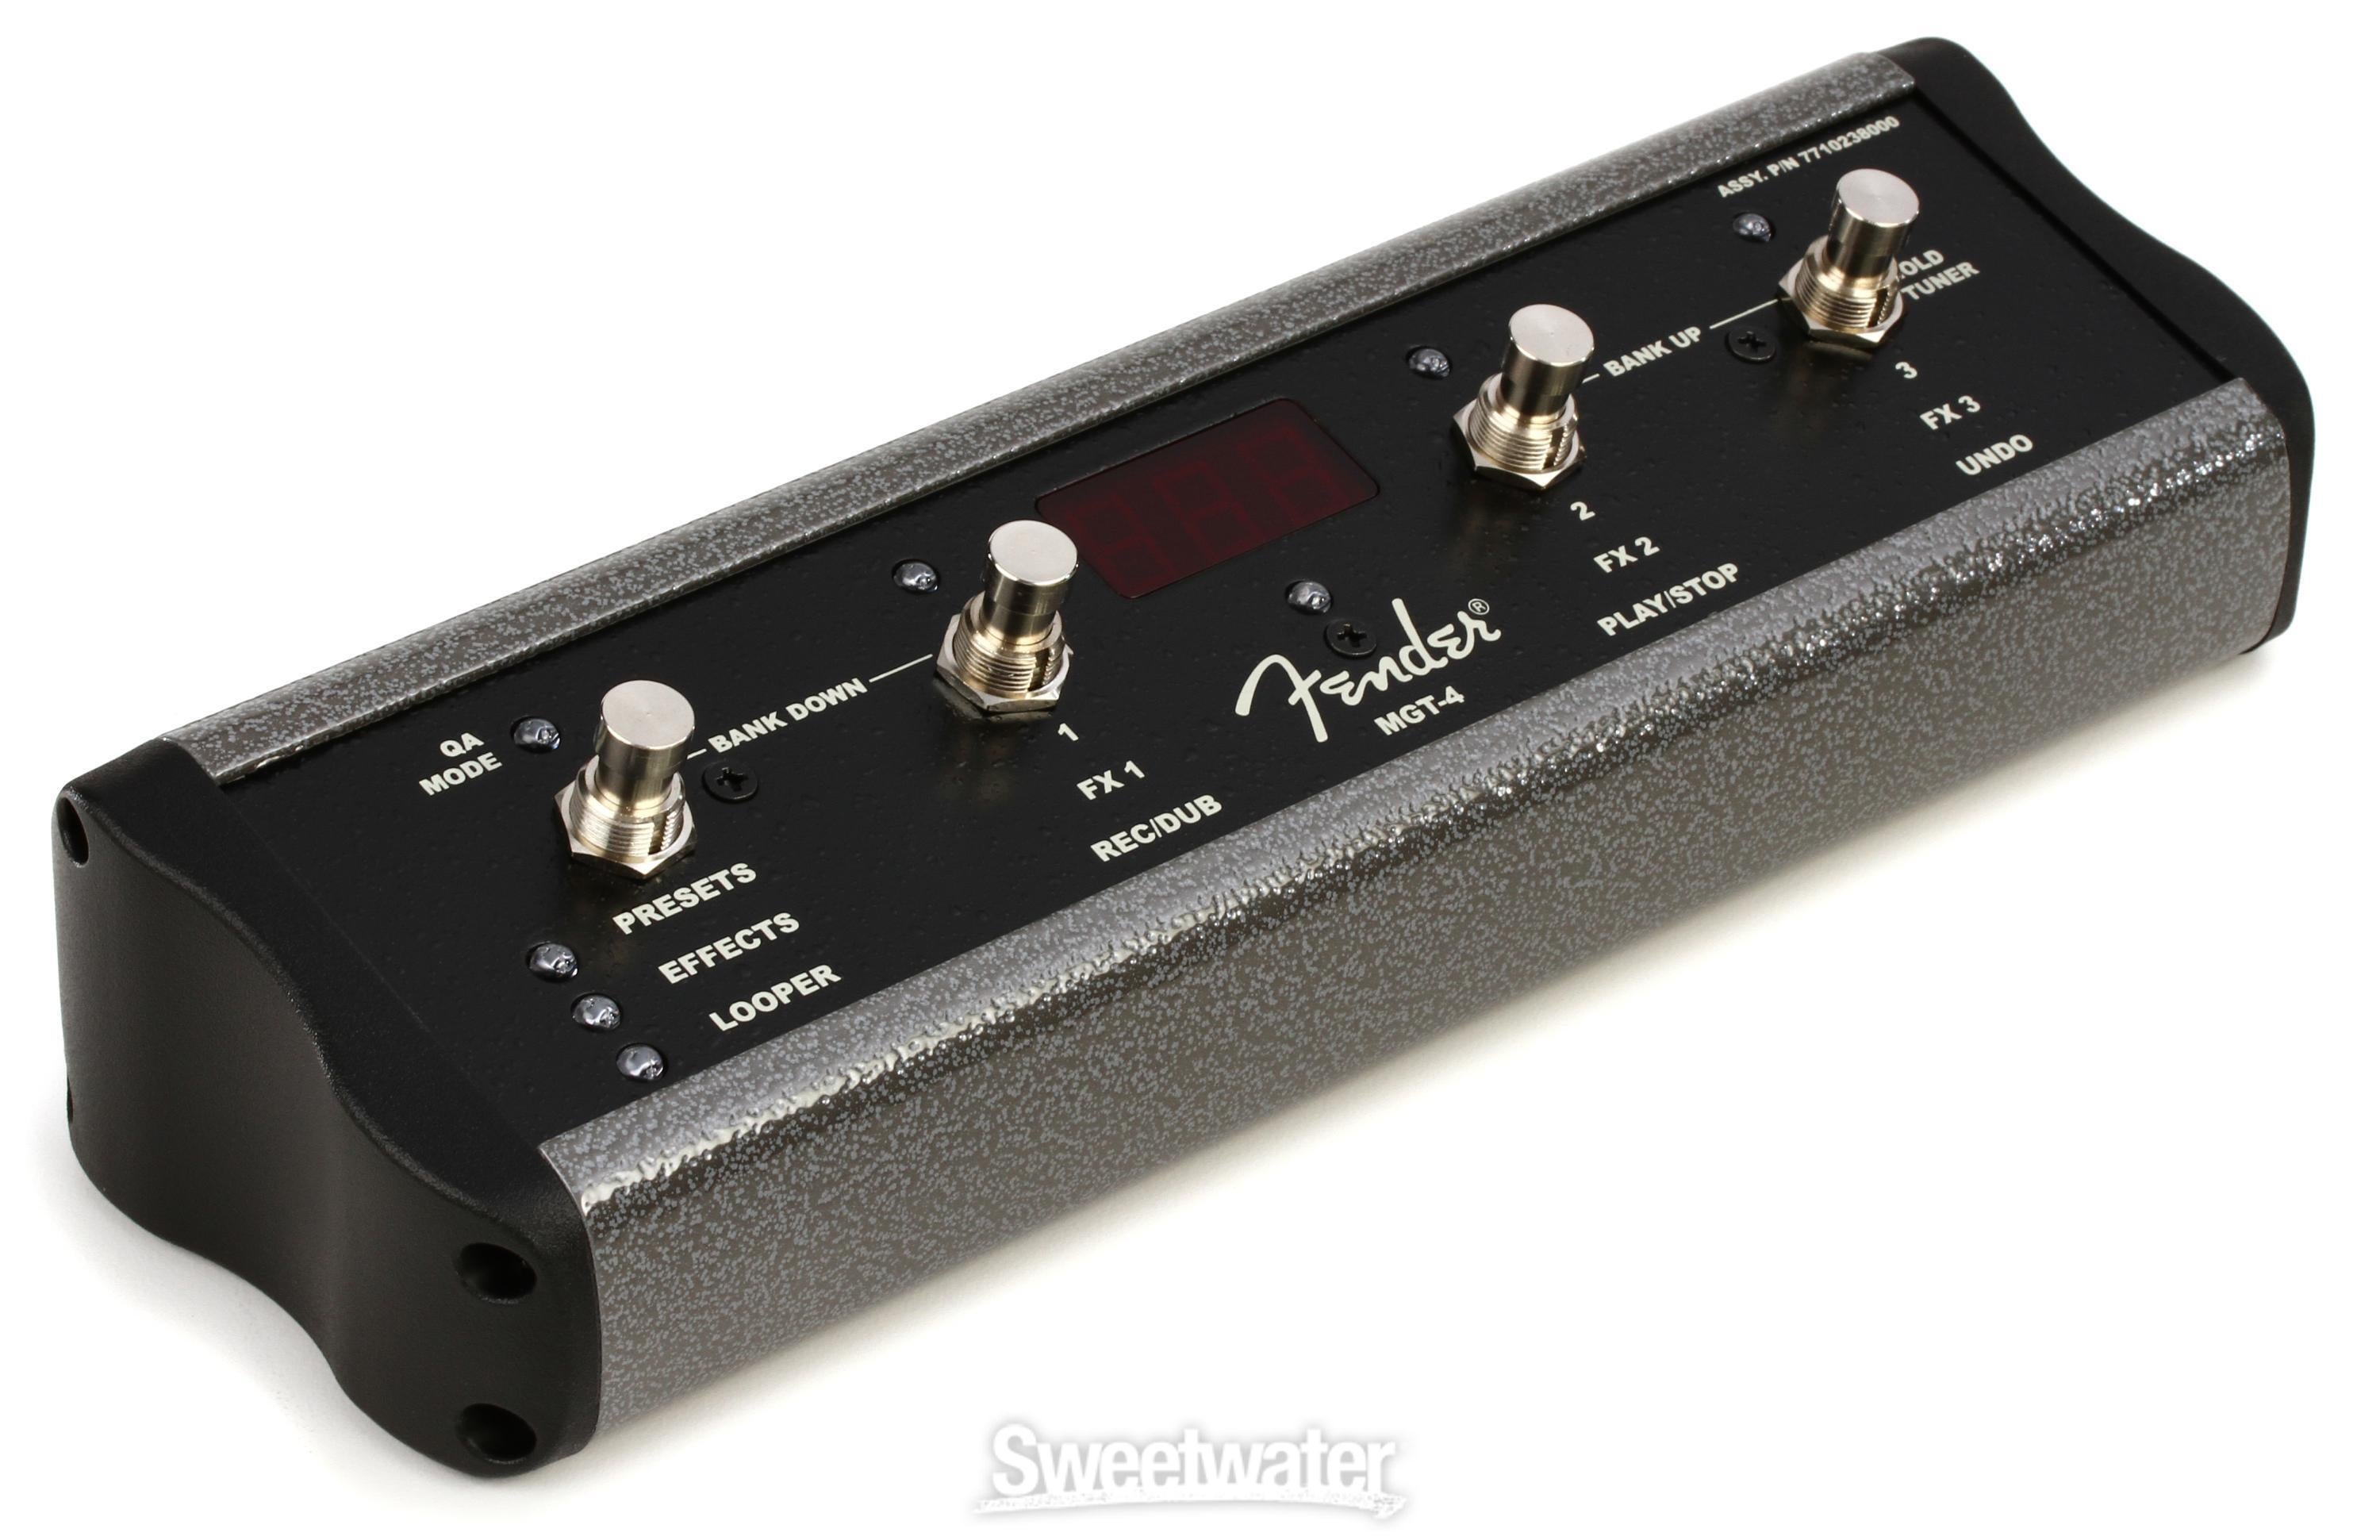 Fender MGT-4 4-button Mustang GT Footswitch Reviews | Sweetwater